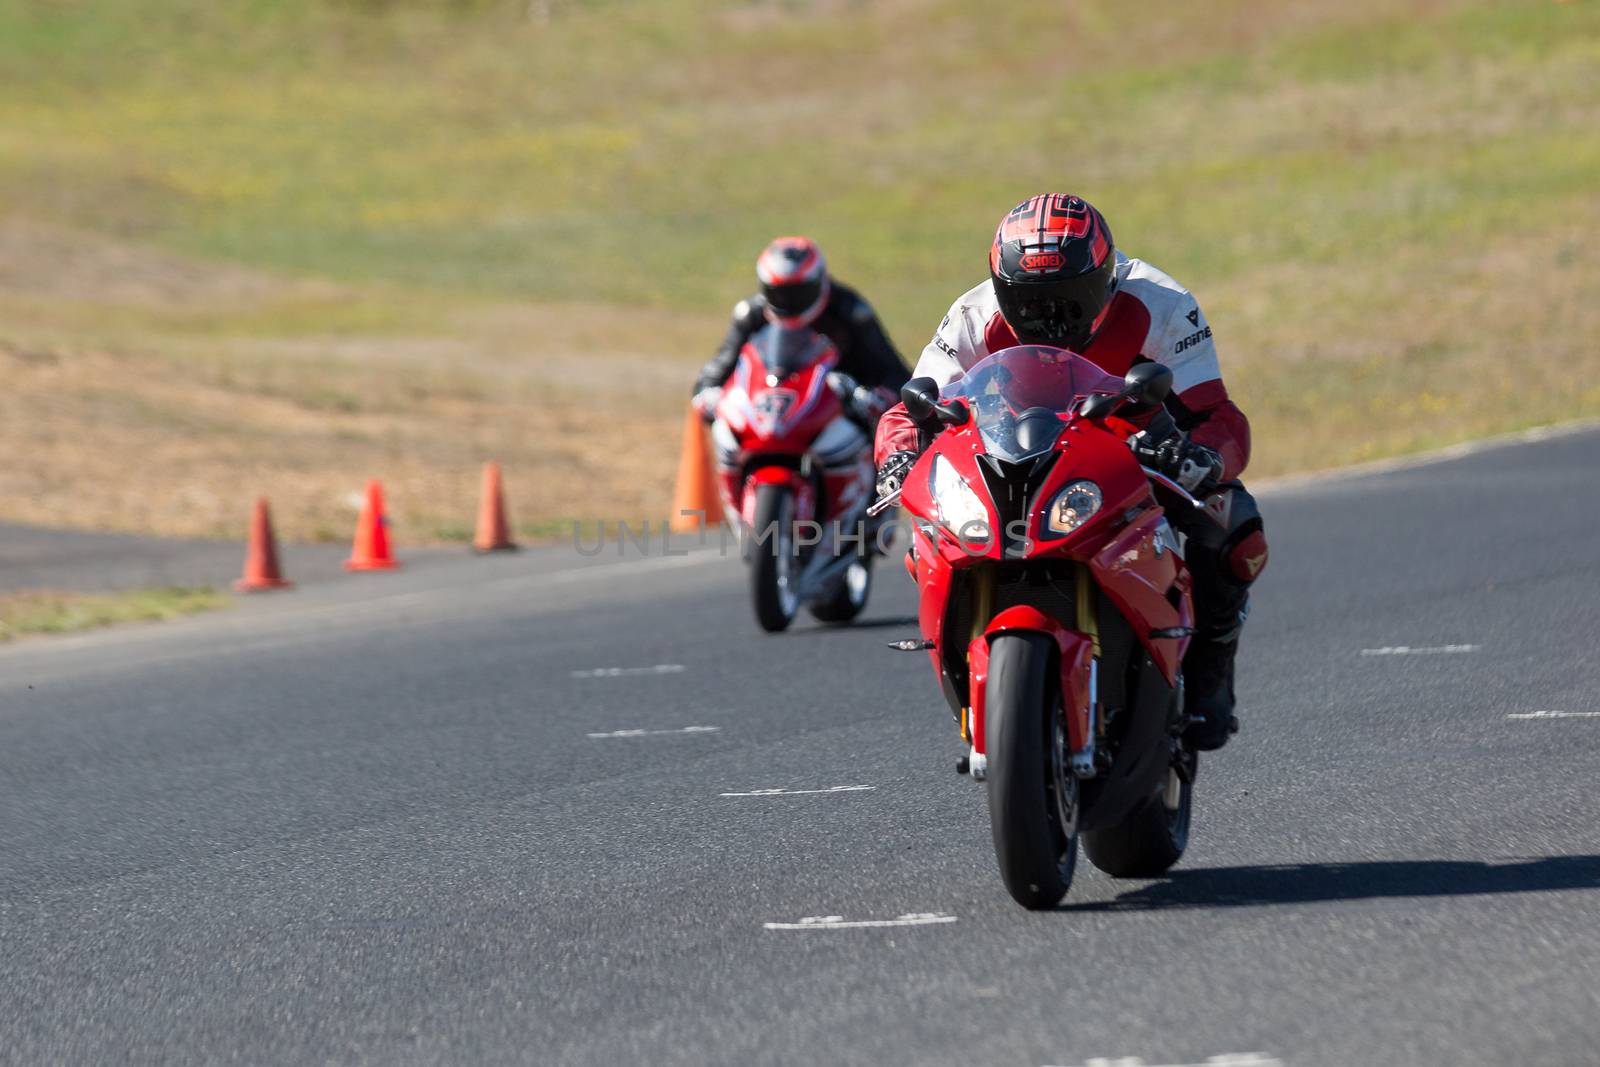 BROADFORD, VICTORIA/AUSTRALIA - MARCH 13: A mix of road and race bikes tussle against each other at The Broadford Motorcycle Complex.